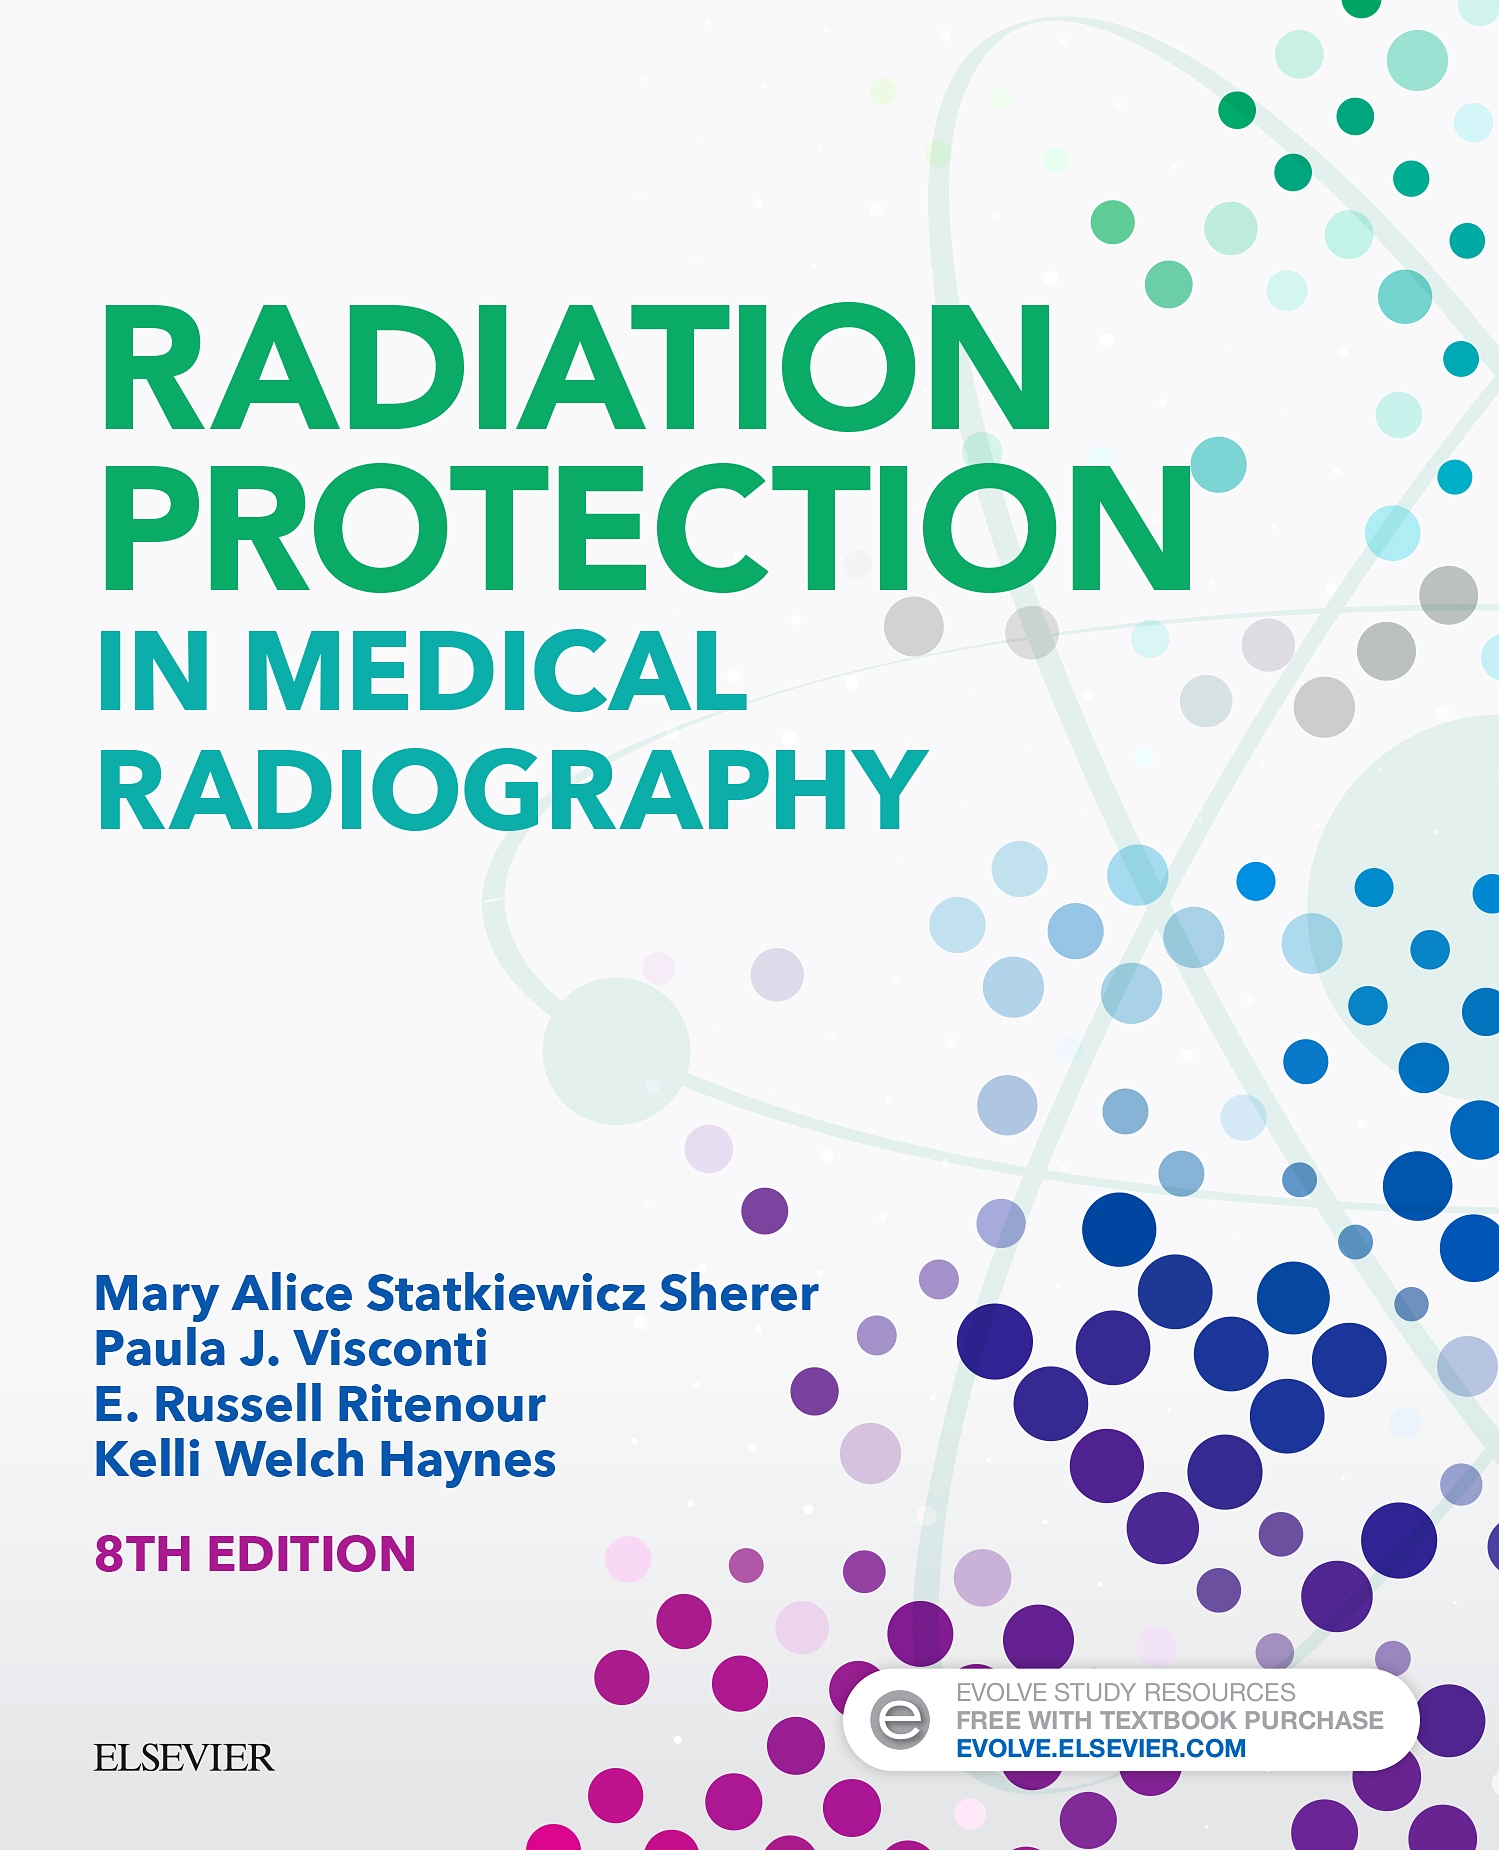 Evolve Resources for Radiation Protection in Medical Radiography, 8th Edition